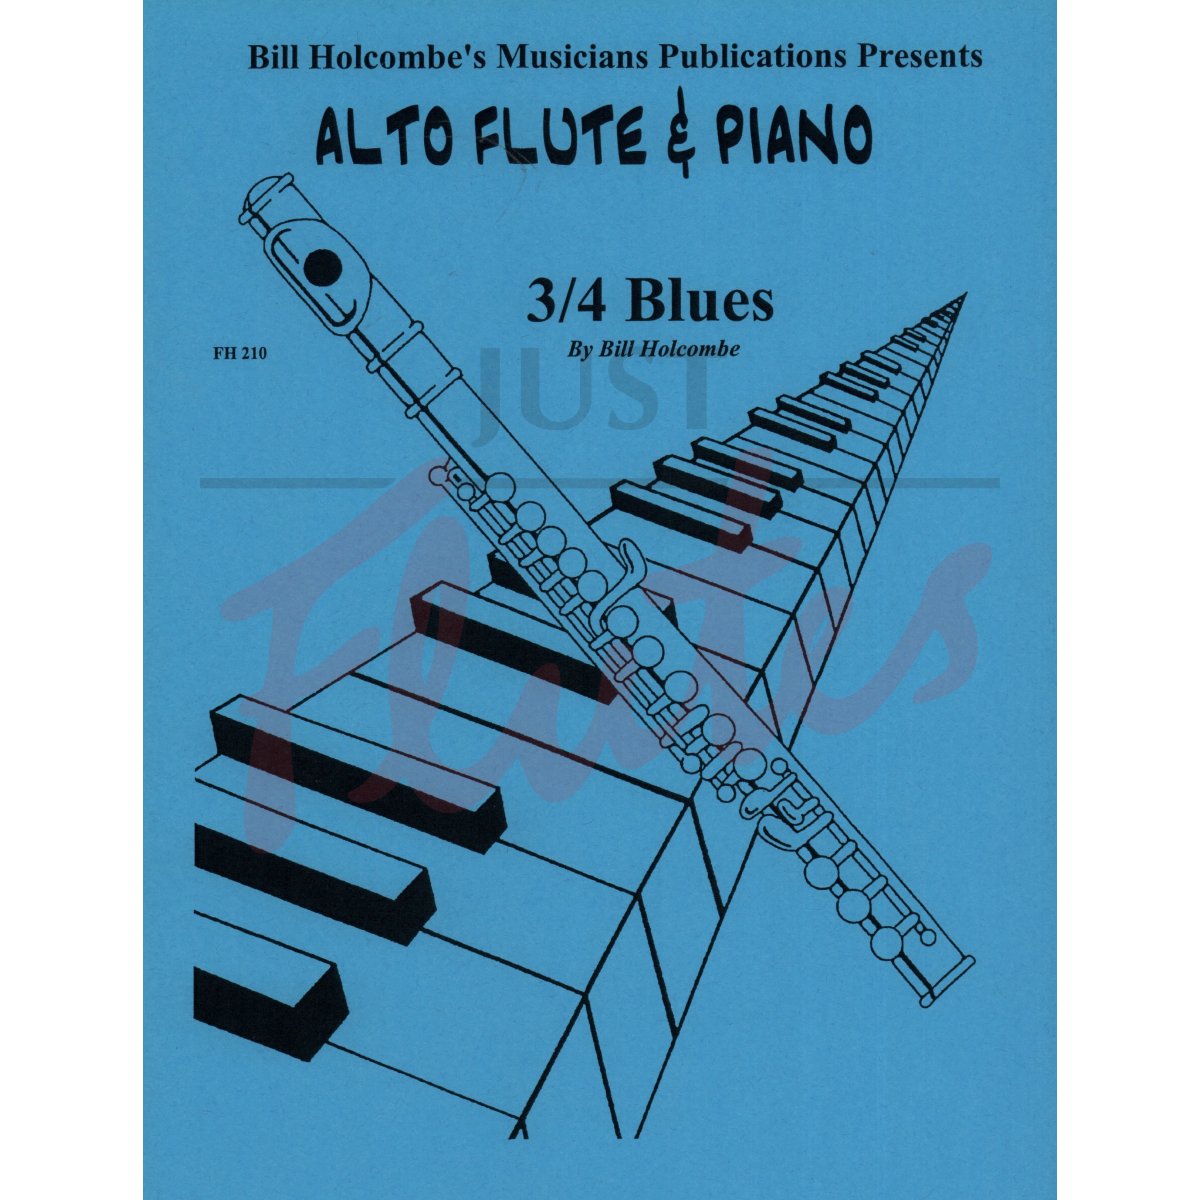 3/4 Blues for Alto Flute and Piano